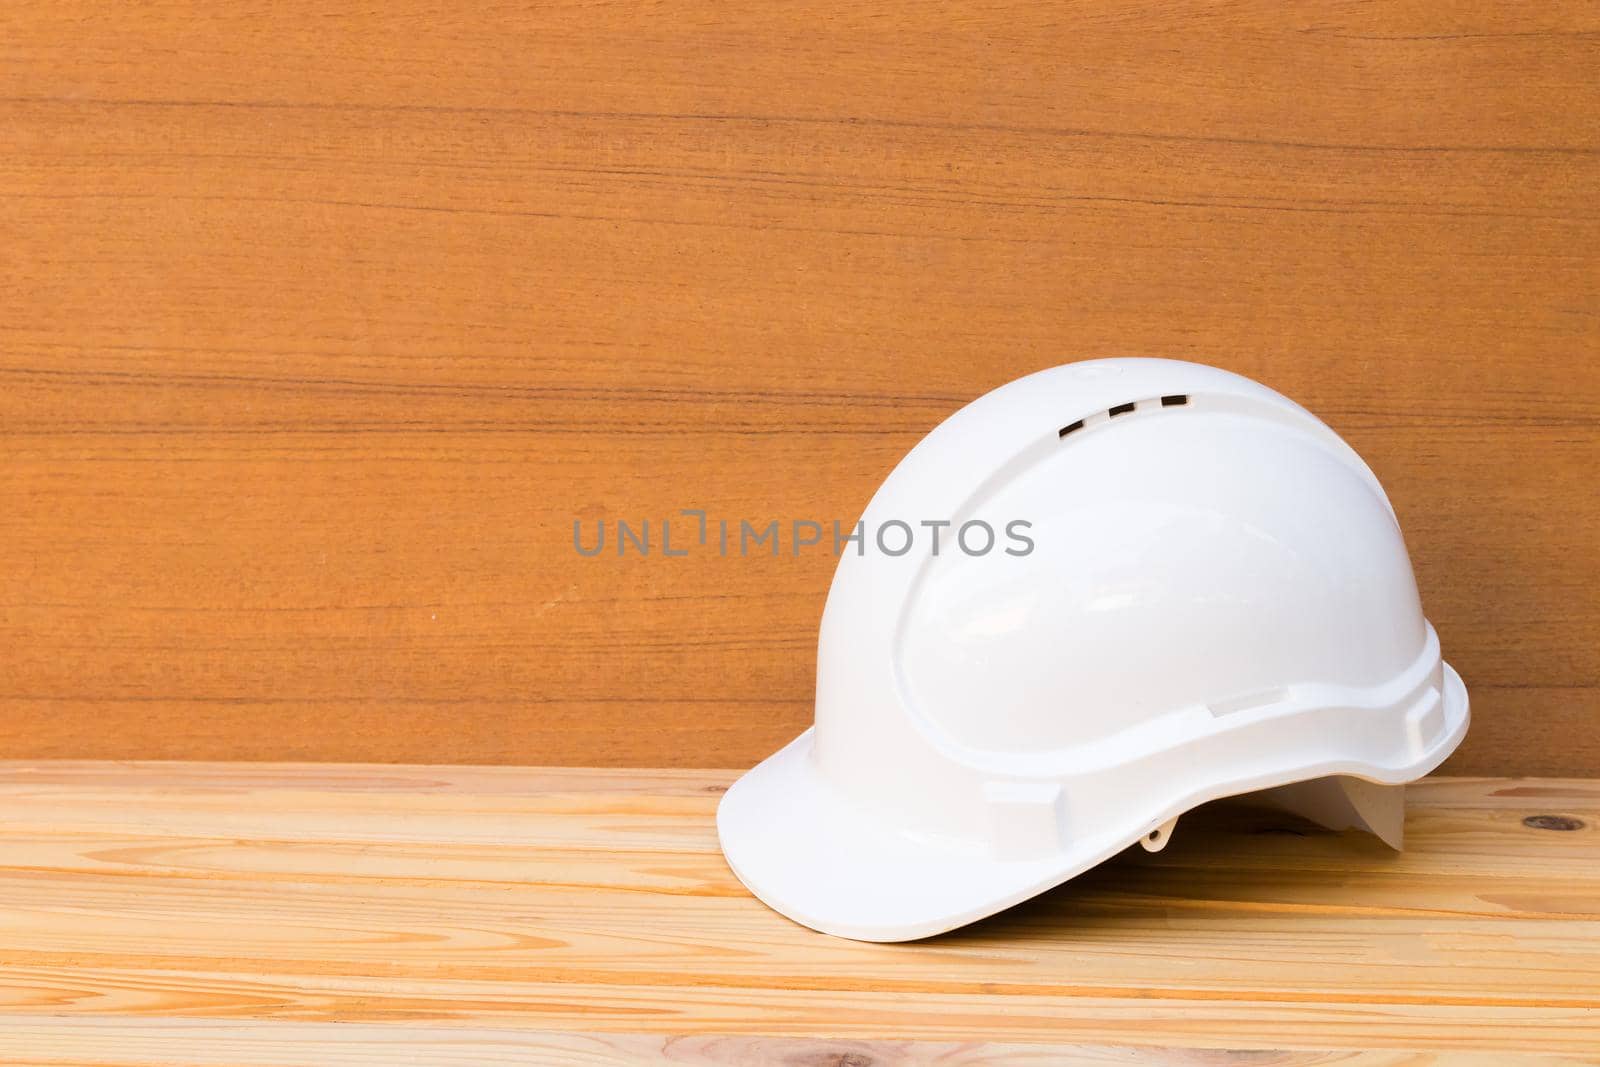 white safety helmet plastic construction of engineering on wood floor table background with copy space add text by pramot